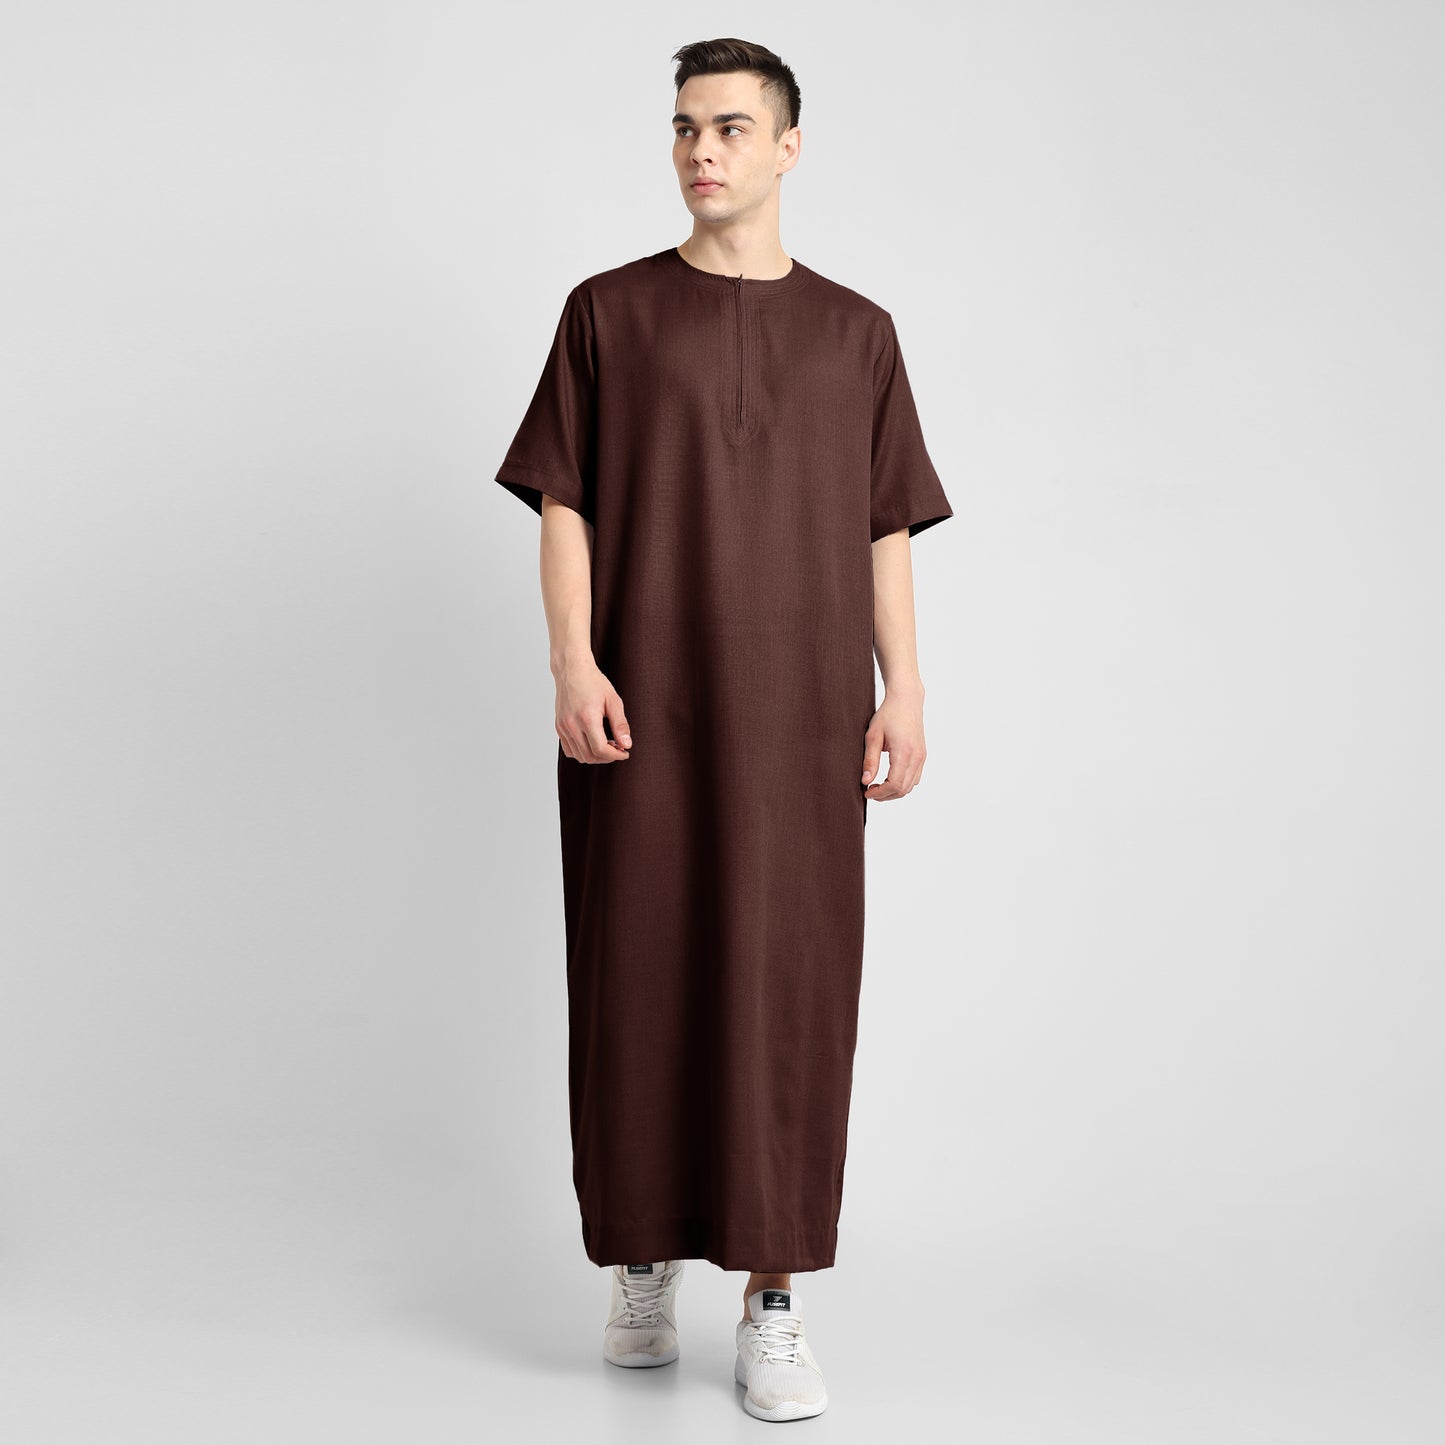 MIDDLE EAST STYLE ROUND HENLEY JUBBA THOBE